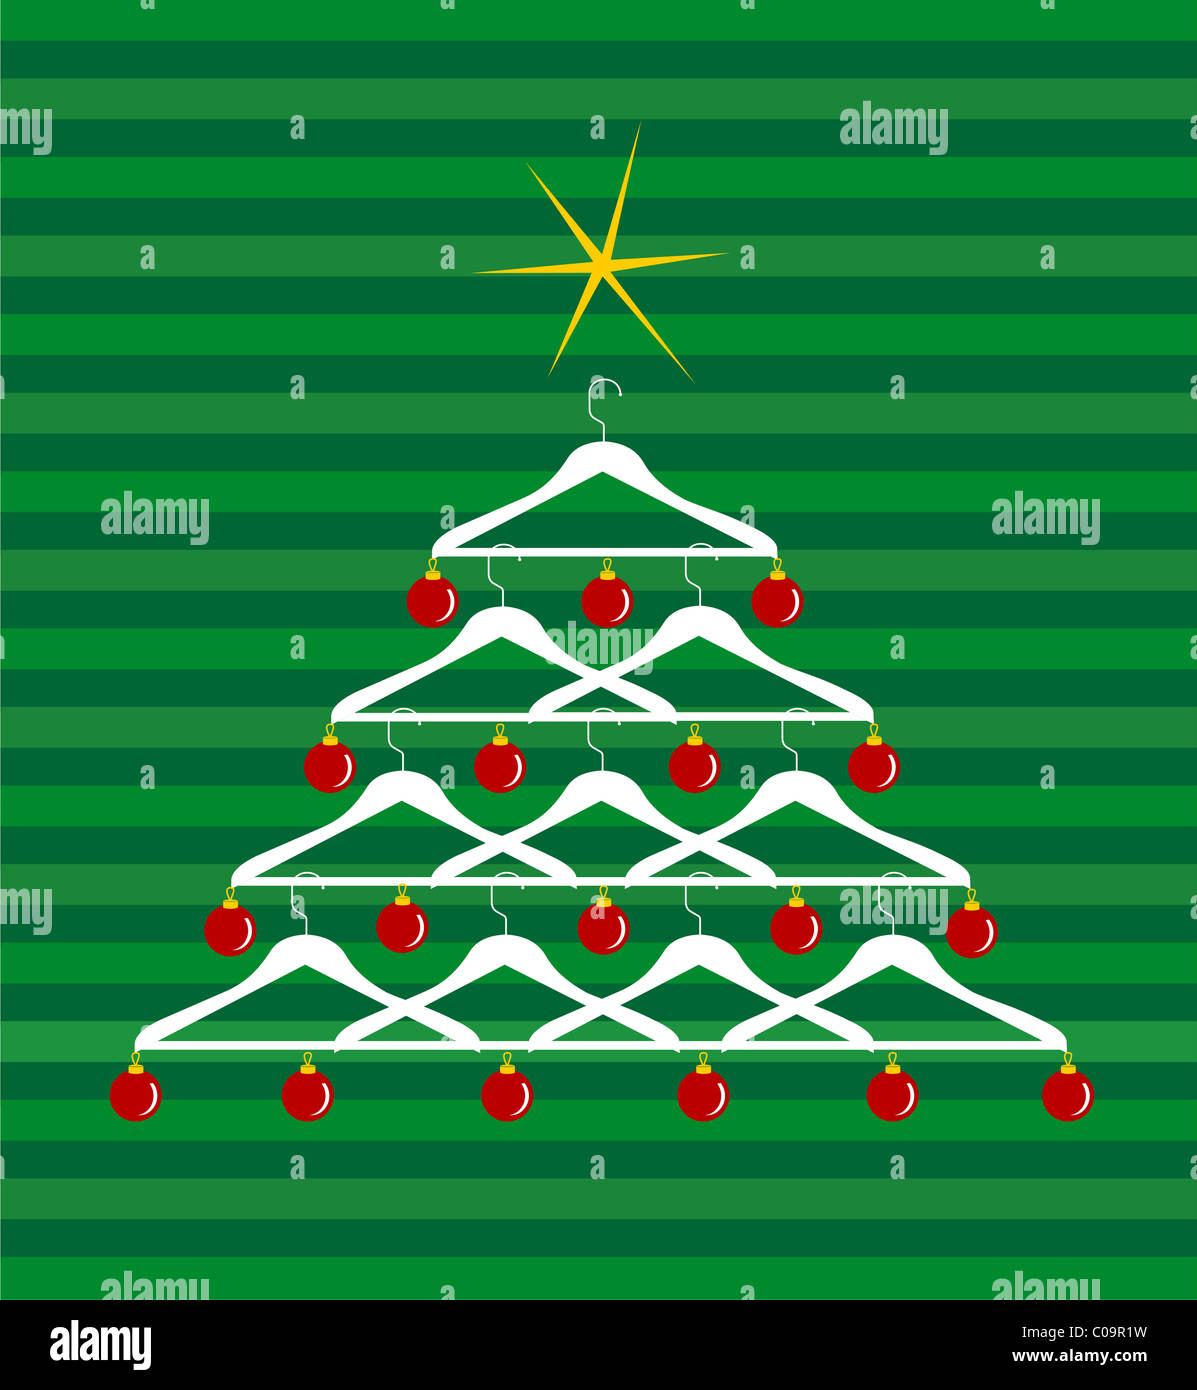 https://c8.alamy.com/comp/C09R1W/christmas-tree-made-of-clothes-hangers-ornated-with-red-balls-yellow-C09R1W.jpg